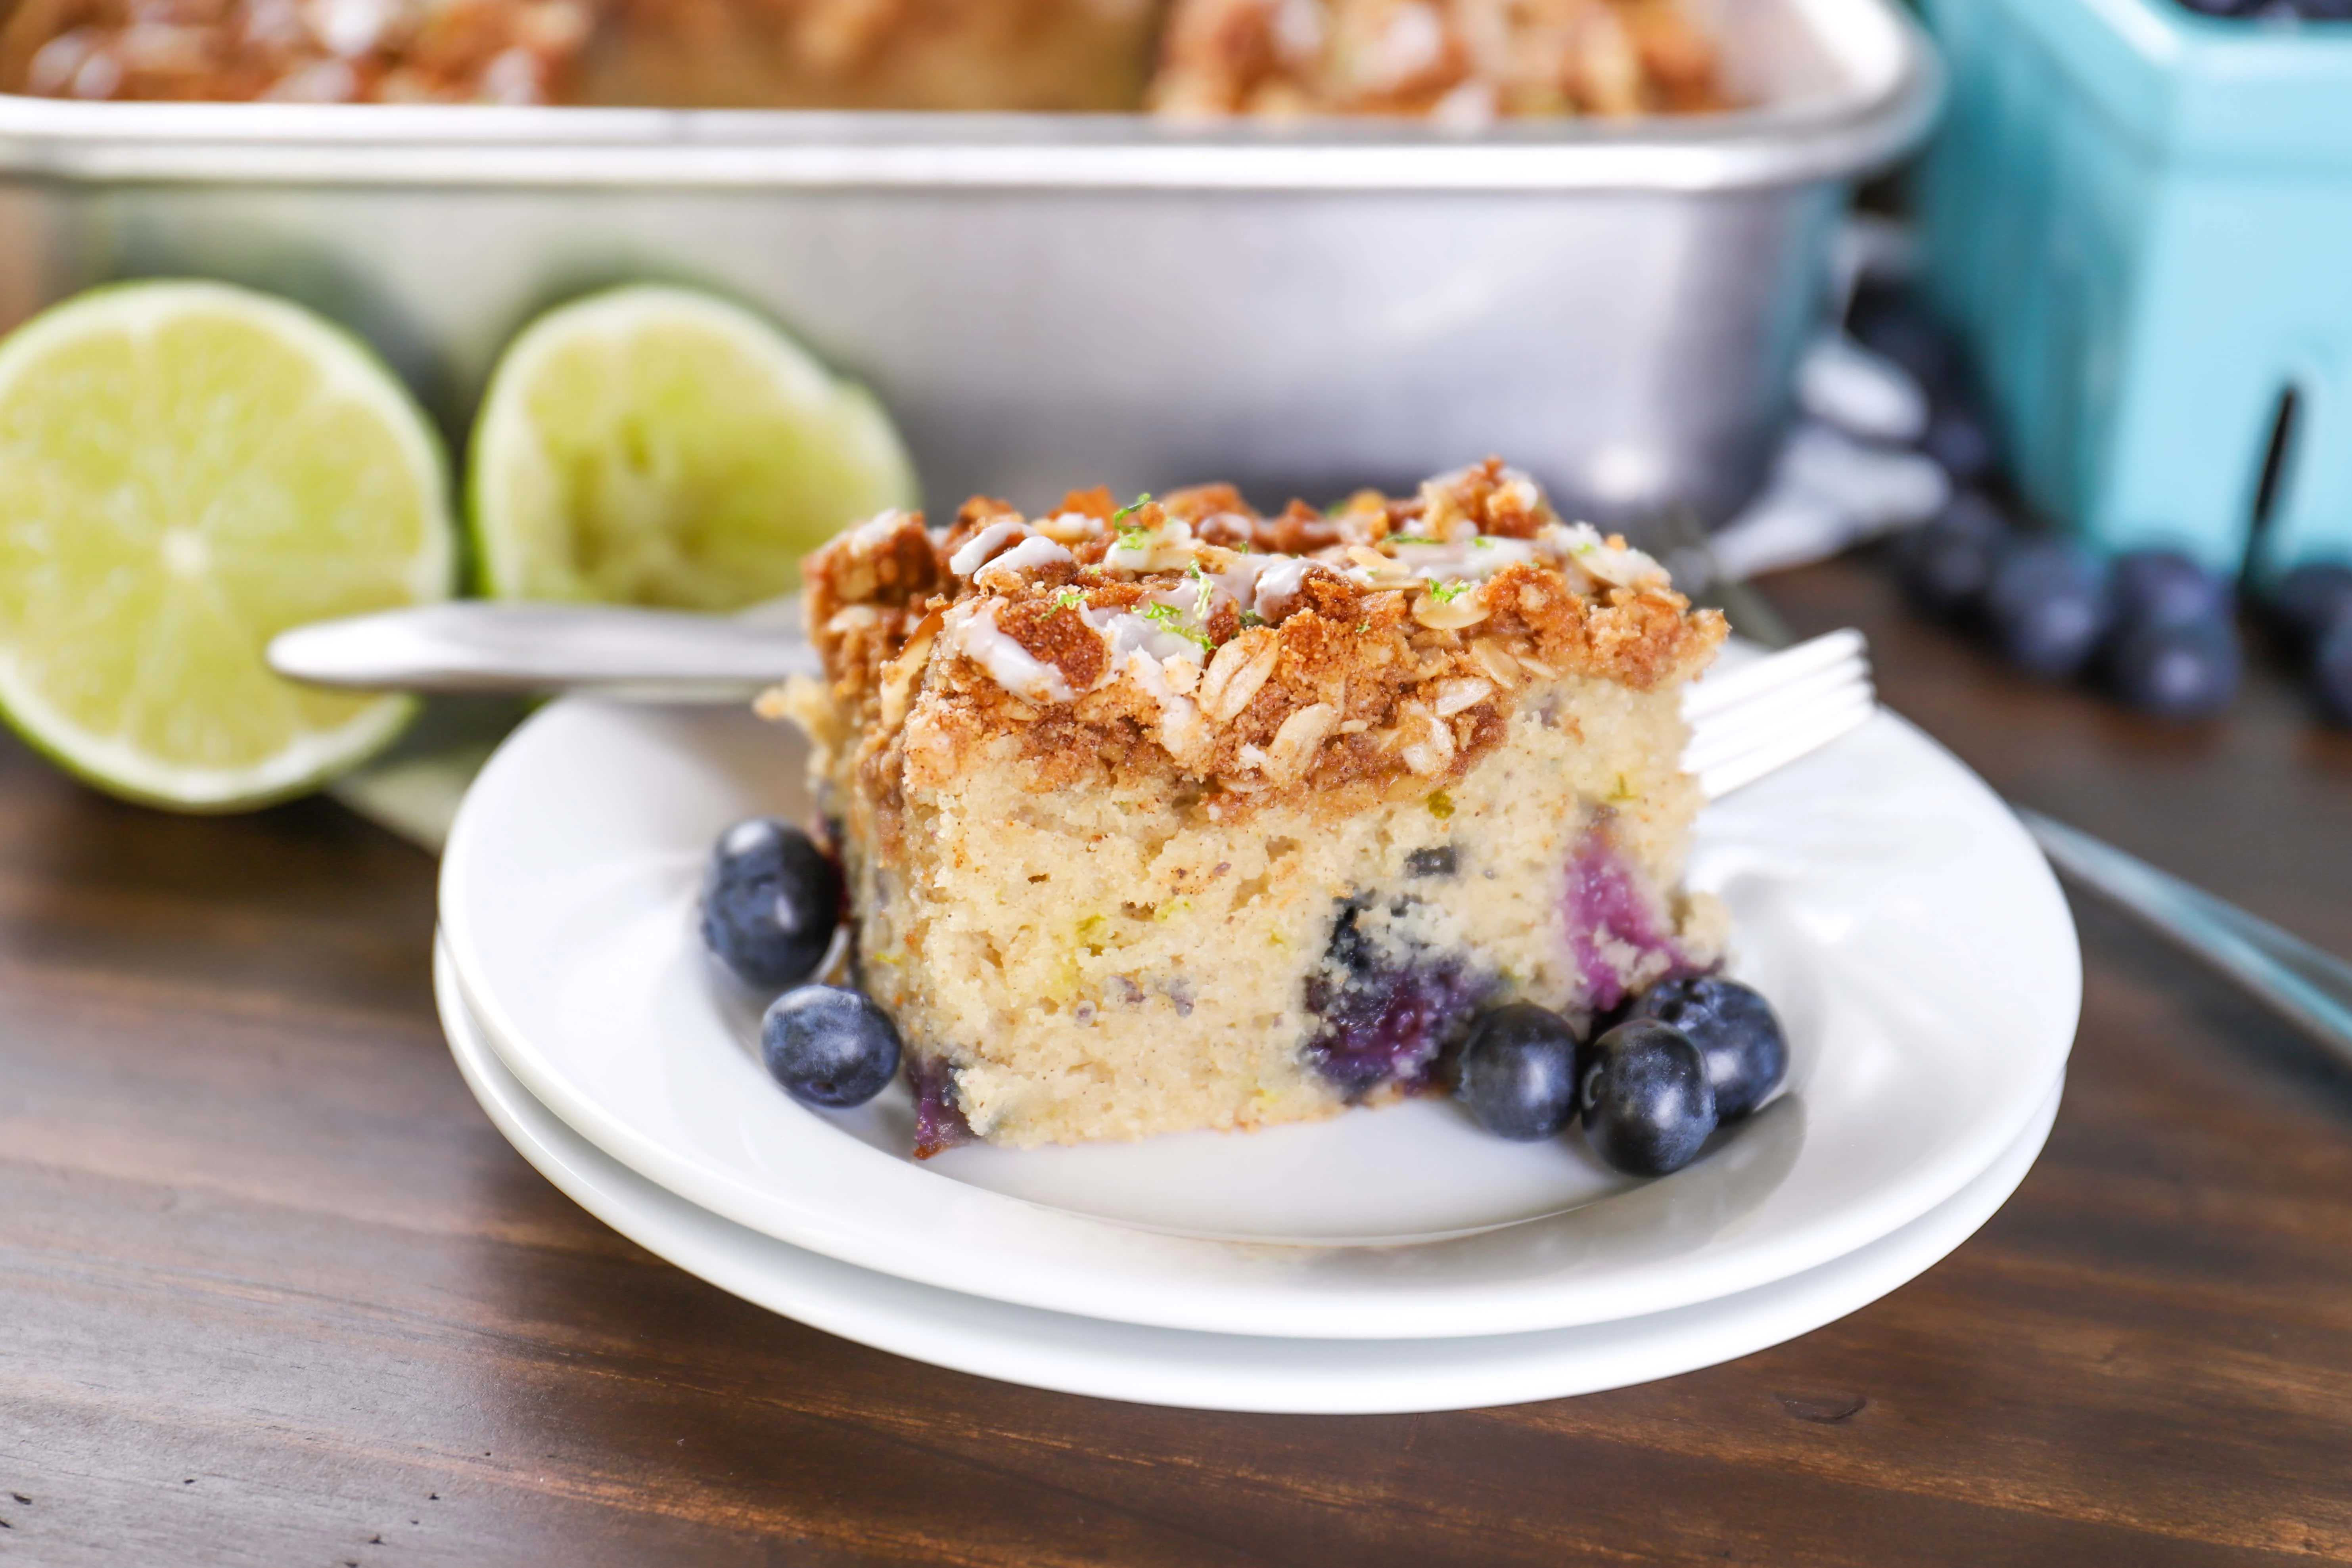 Easy Gluten Free Blueberry Lime Coffee Cake with Almond Streusel